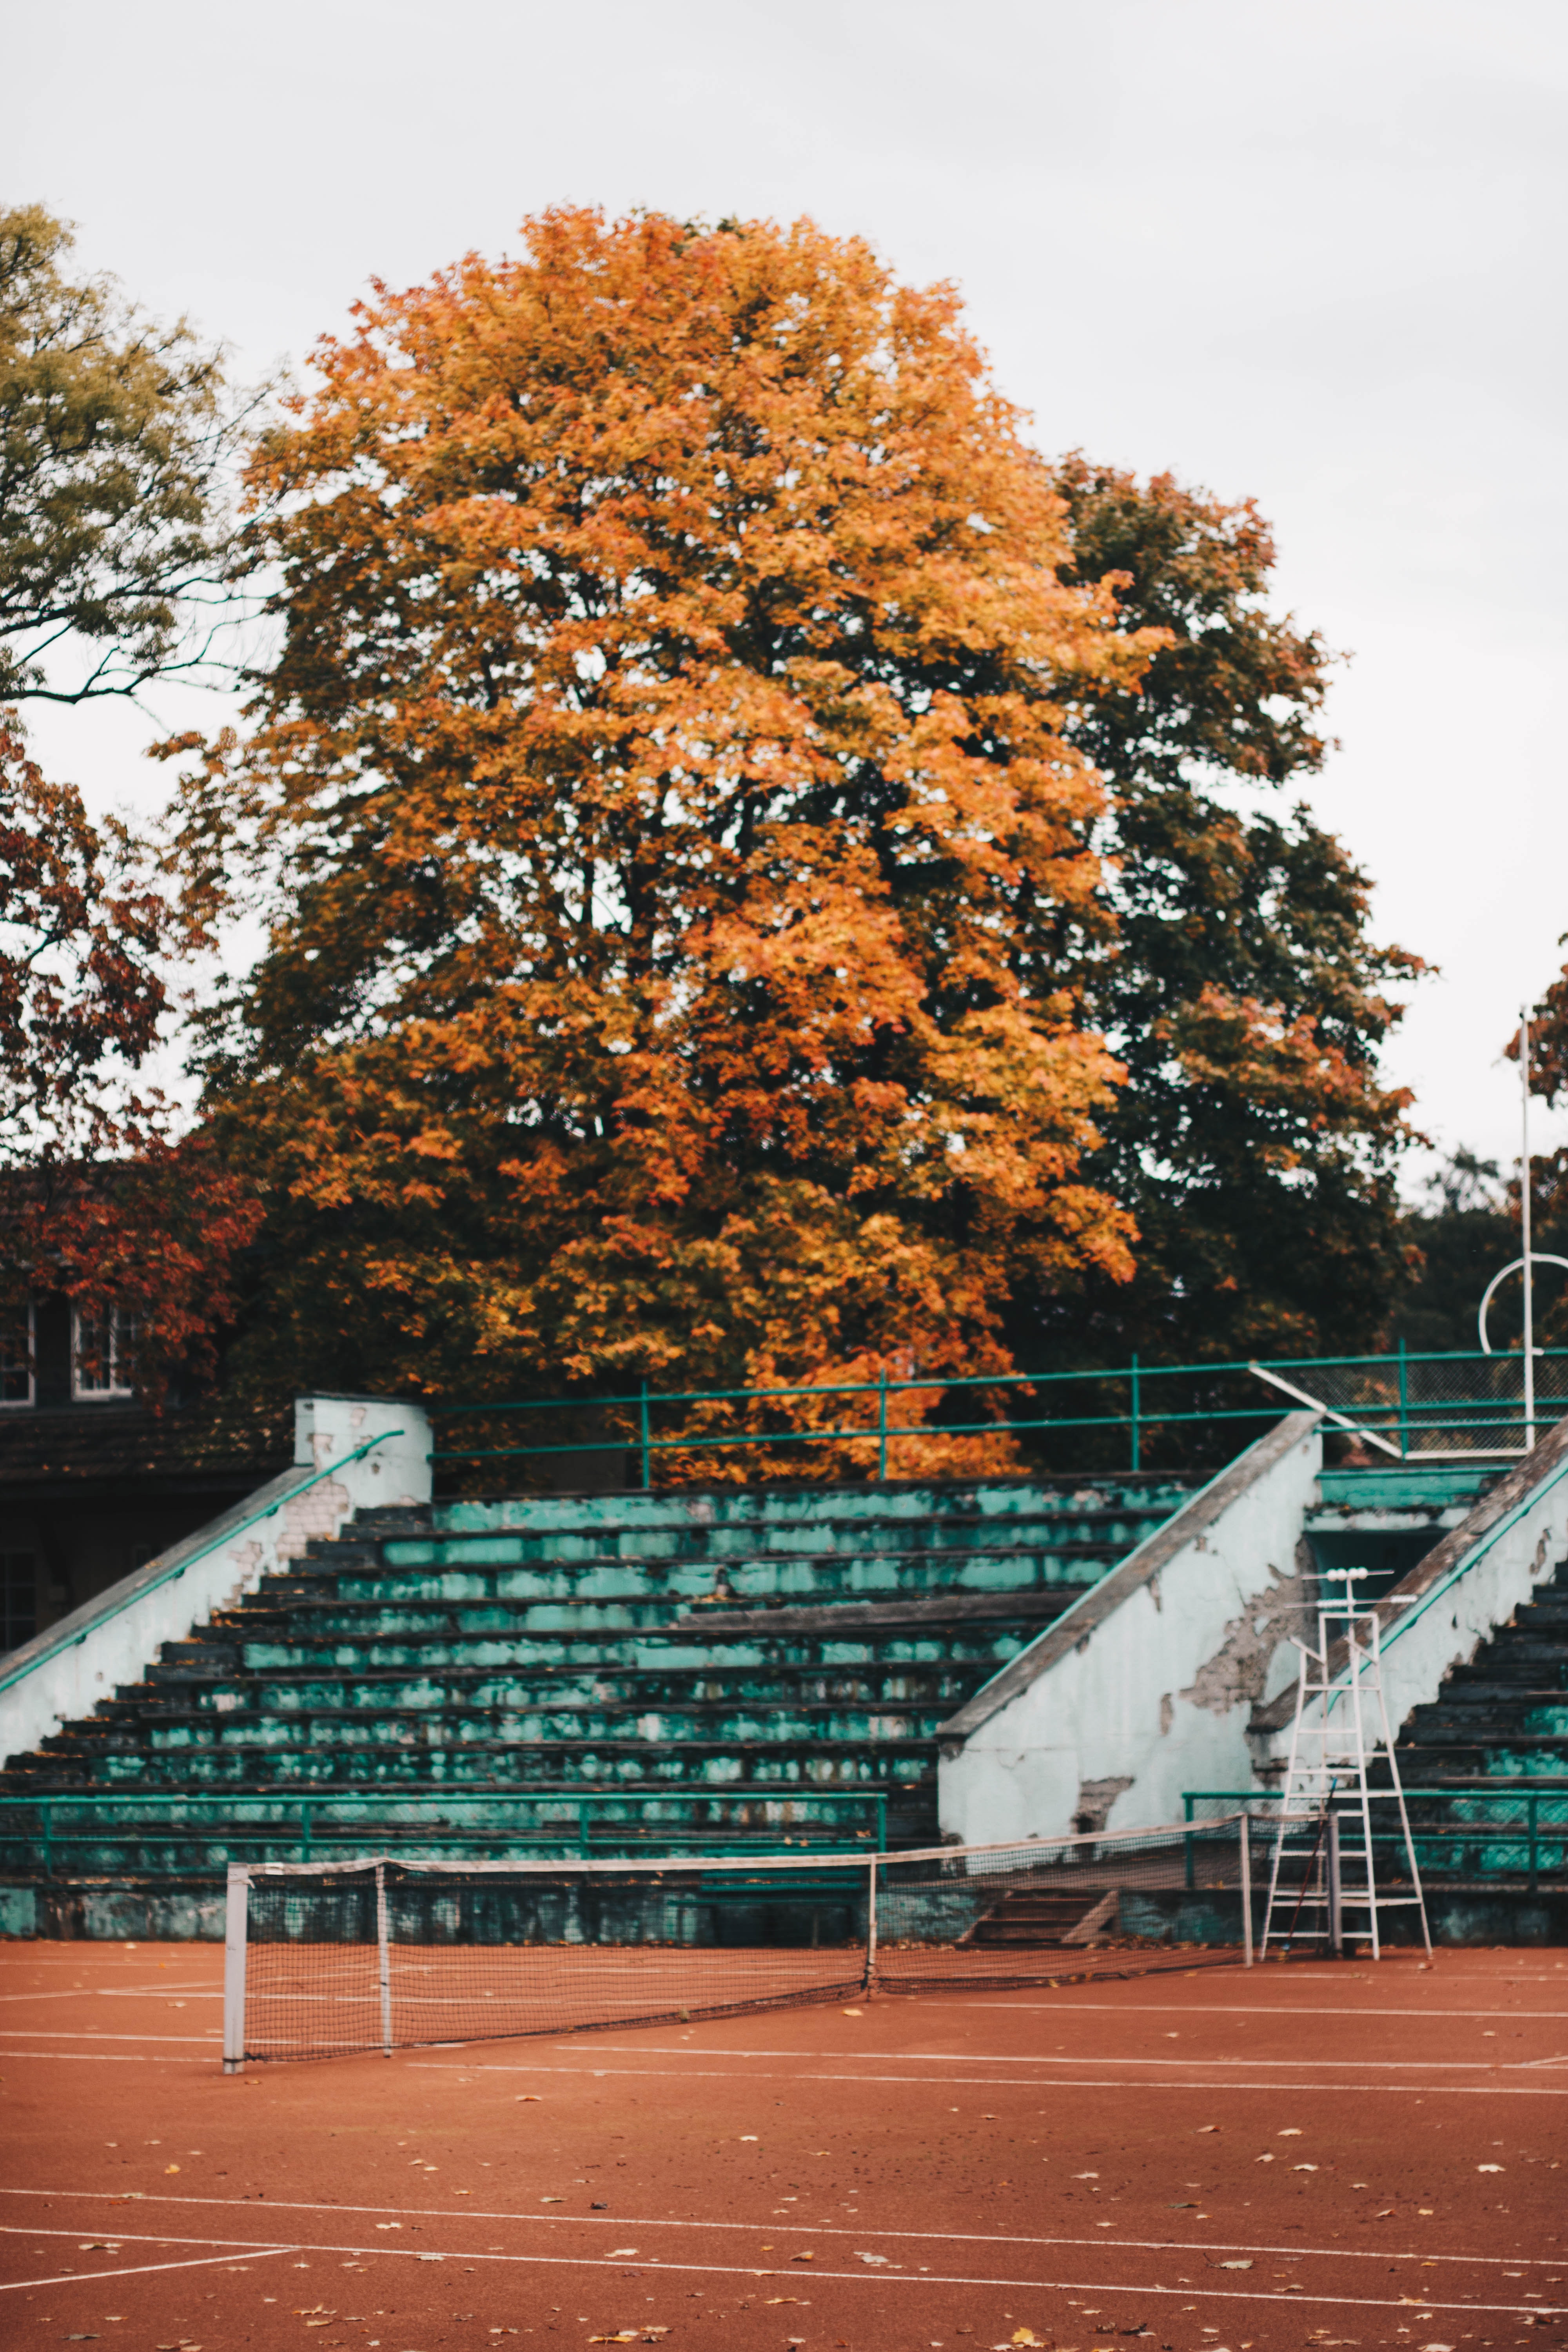 Empty green and white concrete bleachers near brown leaf tree at daytime photo